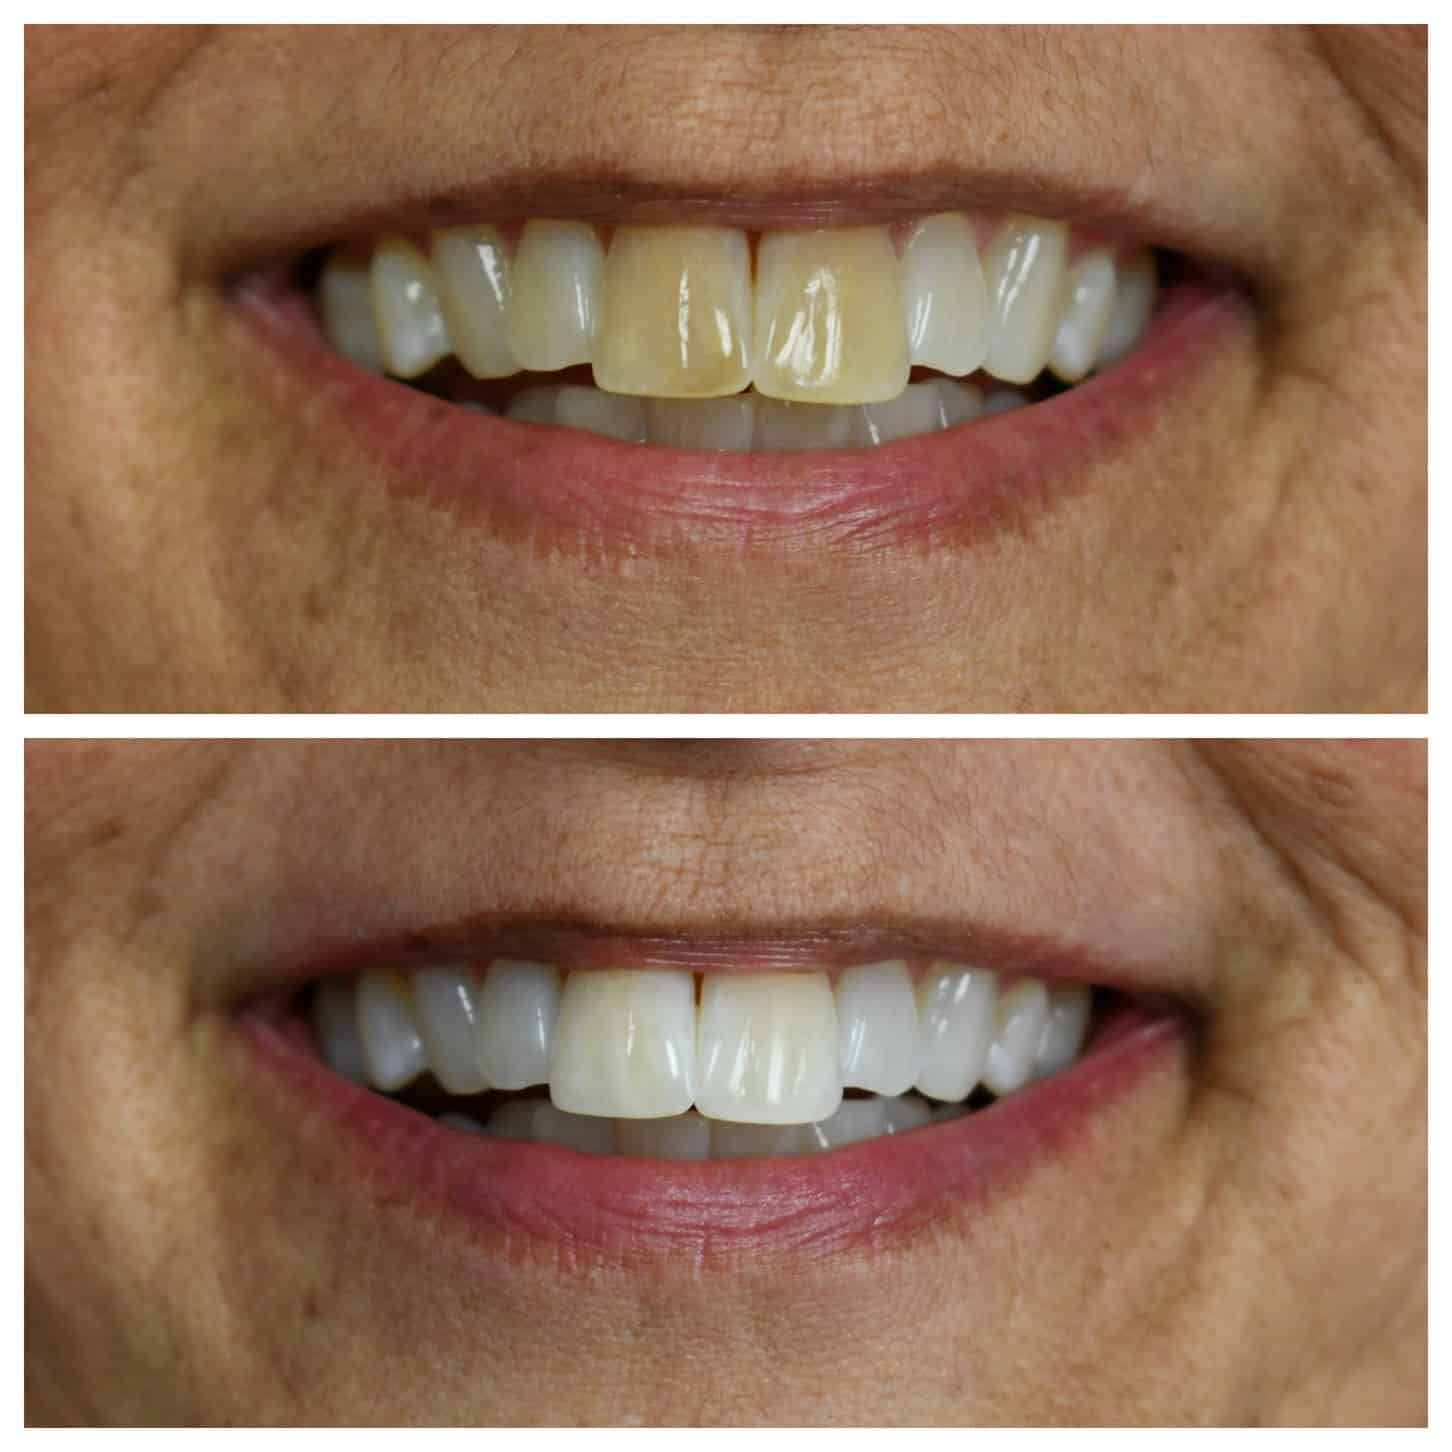 KOR teeth whitening treatment available in Brentwood, TN